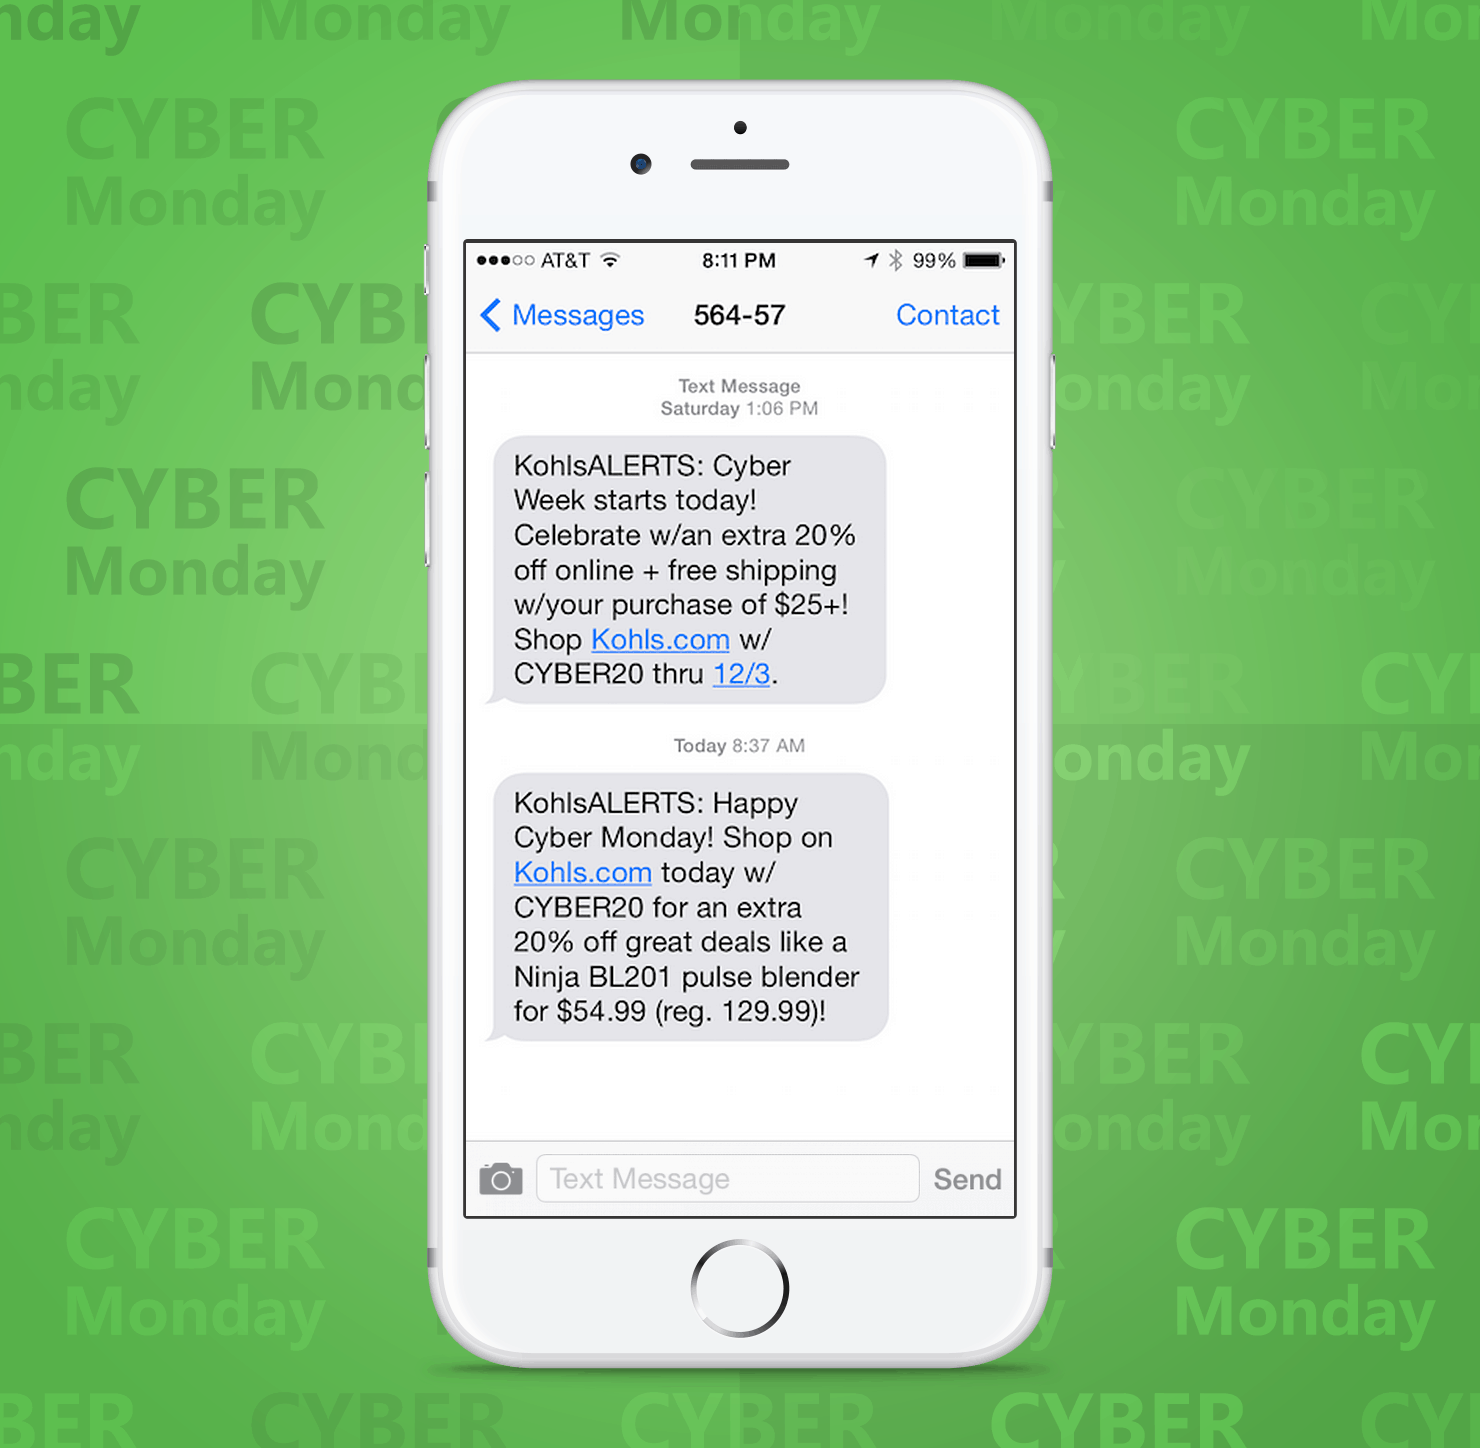 SMS Coupon Example Sent on Cyber Monday From Kohls Retail Stores to Customers